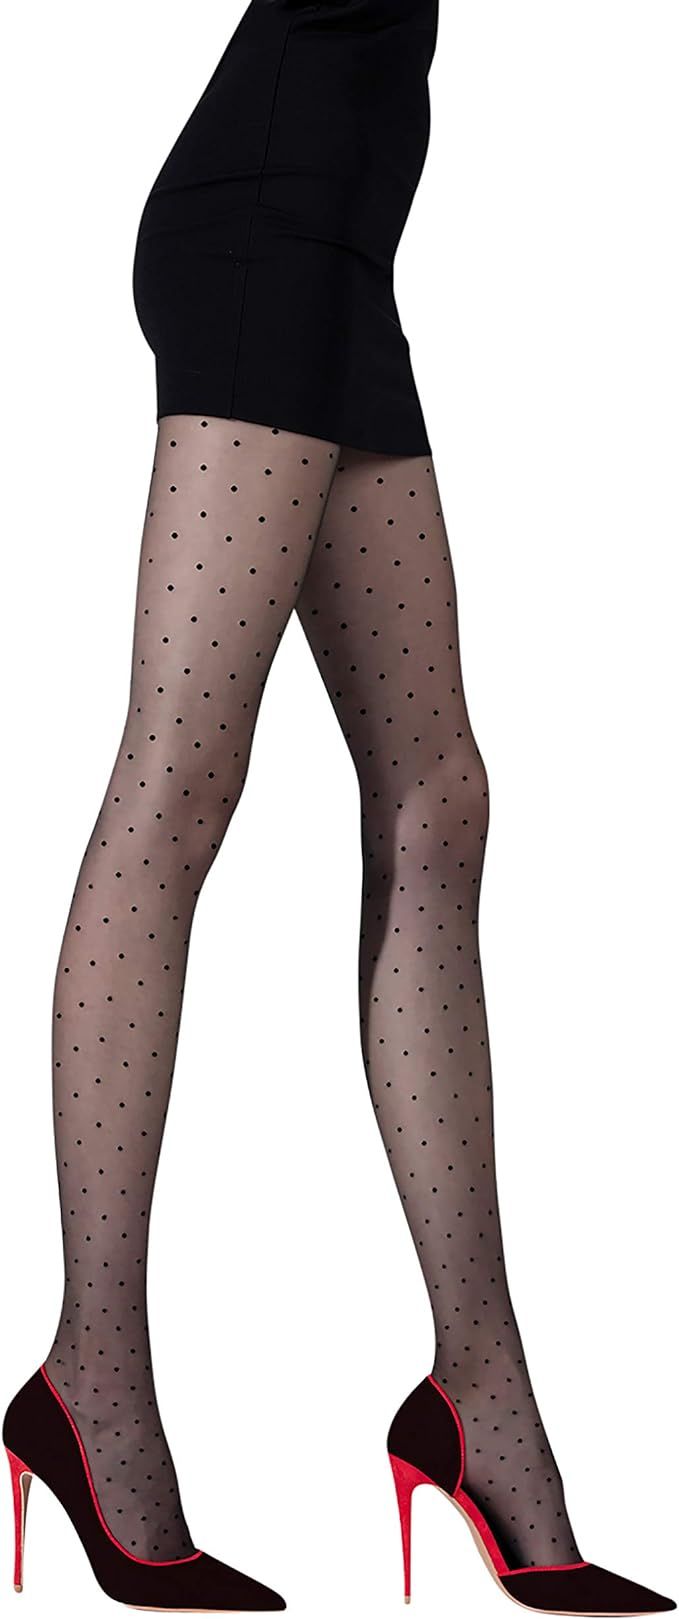 Polka Dot Tights for Women, Made in Europe, Sheer Patterned Pantyhose, Punto 20 DEN | Amazon (US)